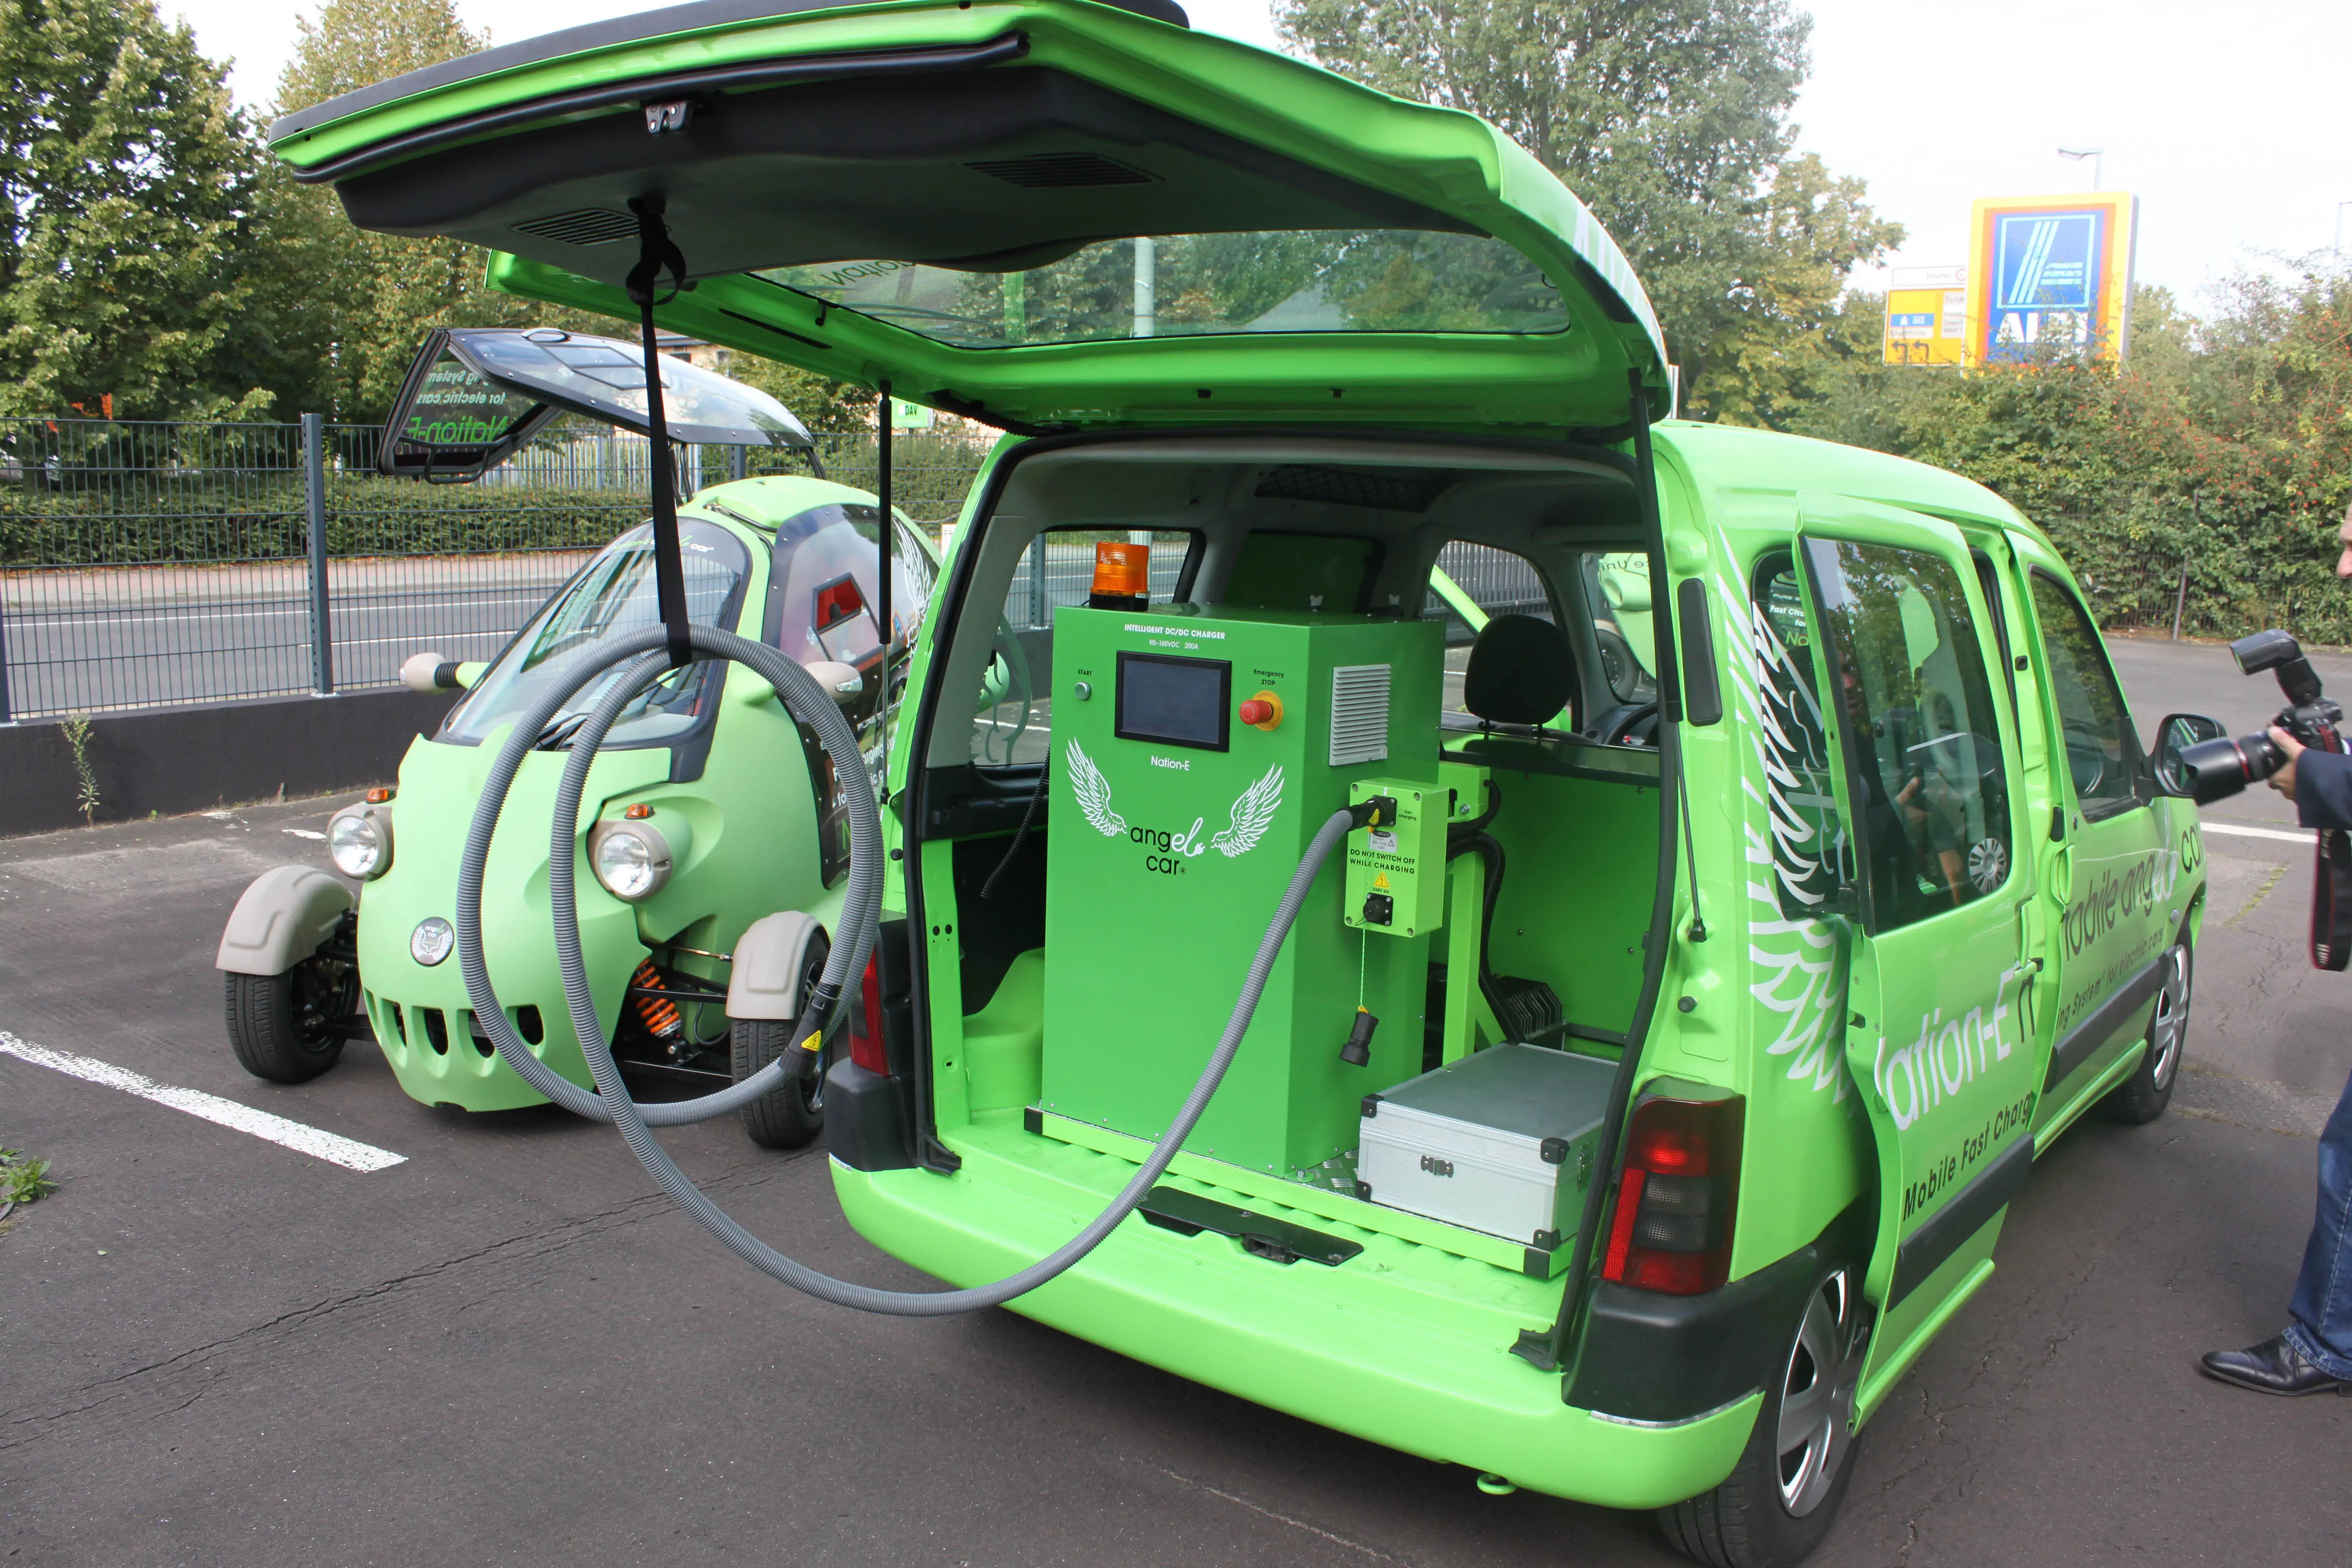 NationE Lauches the First Mobile Charging Station for Electric Cars